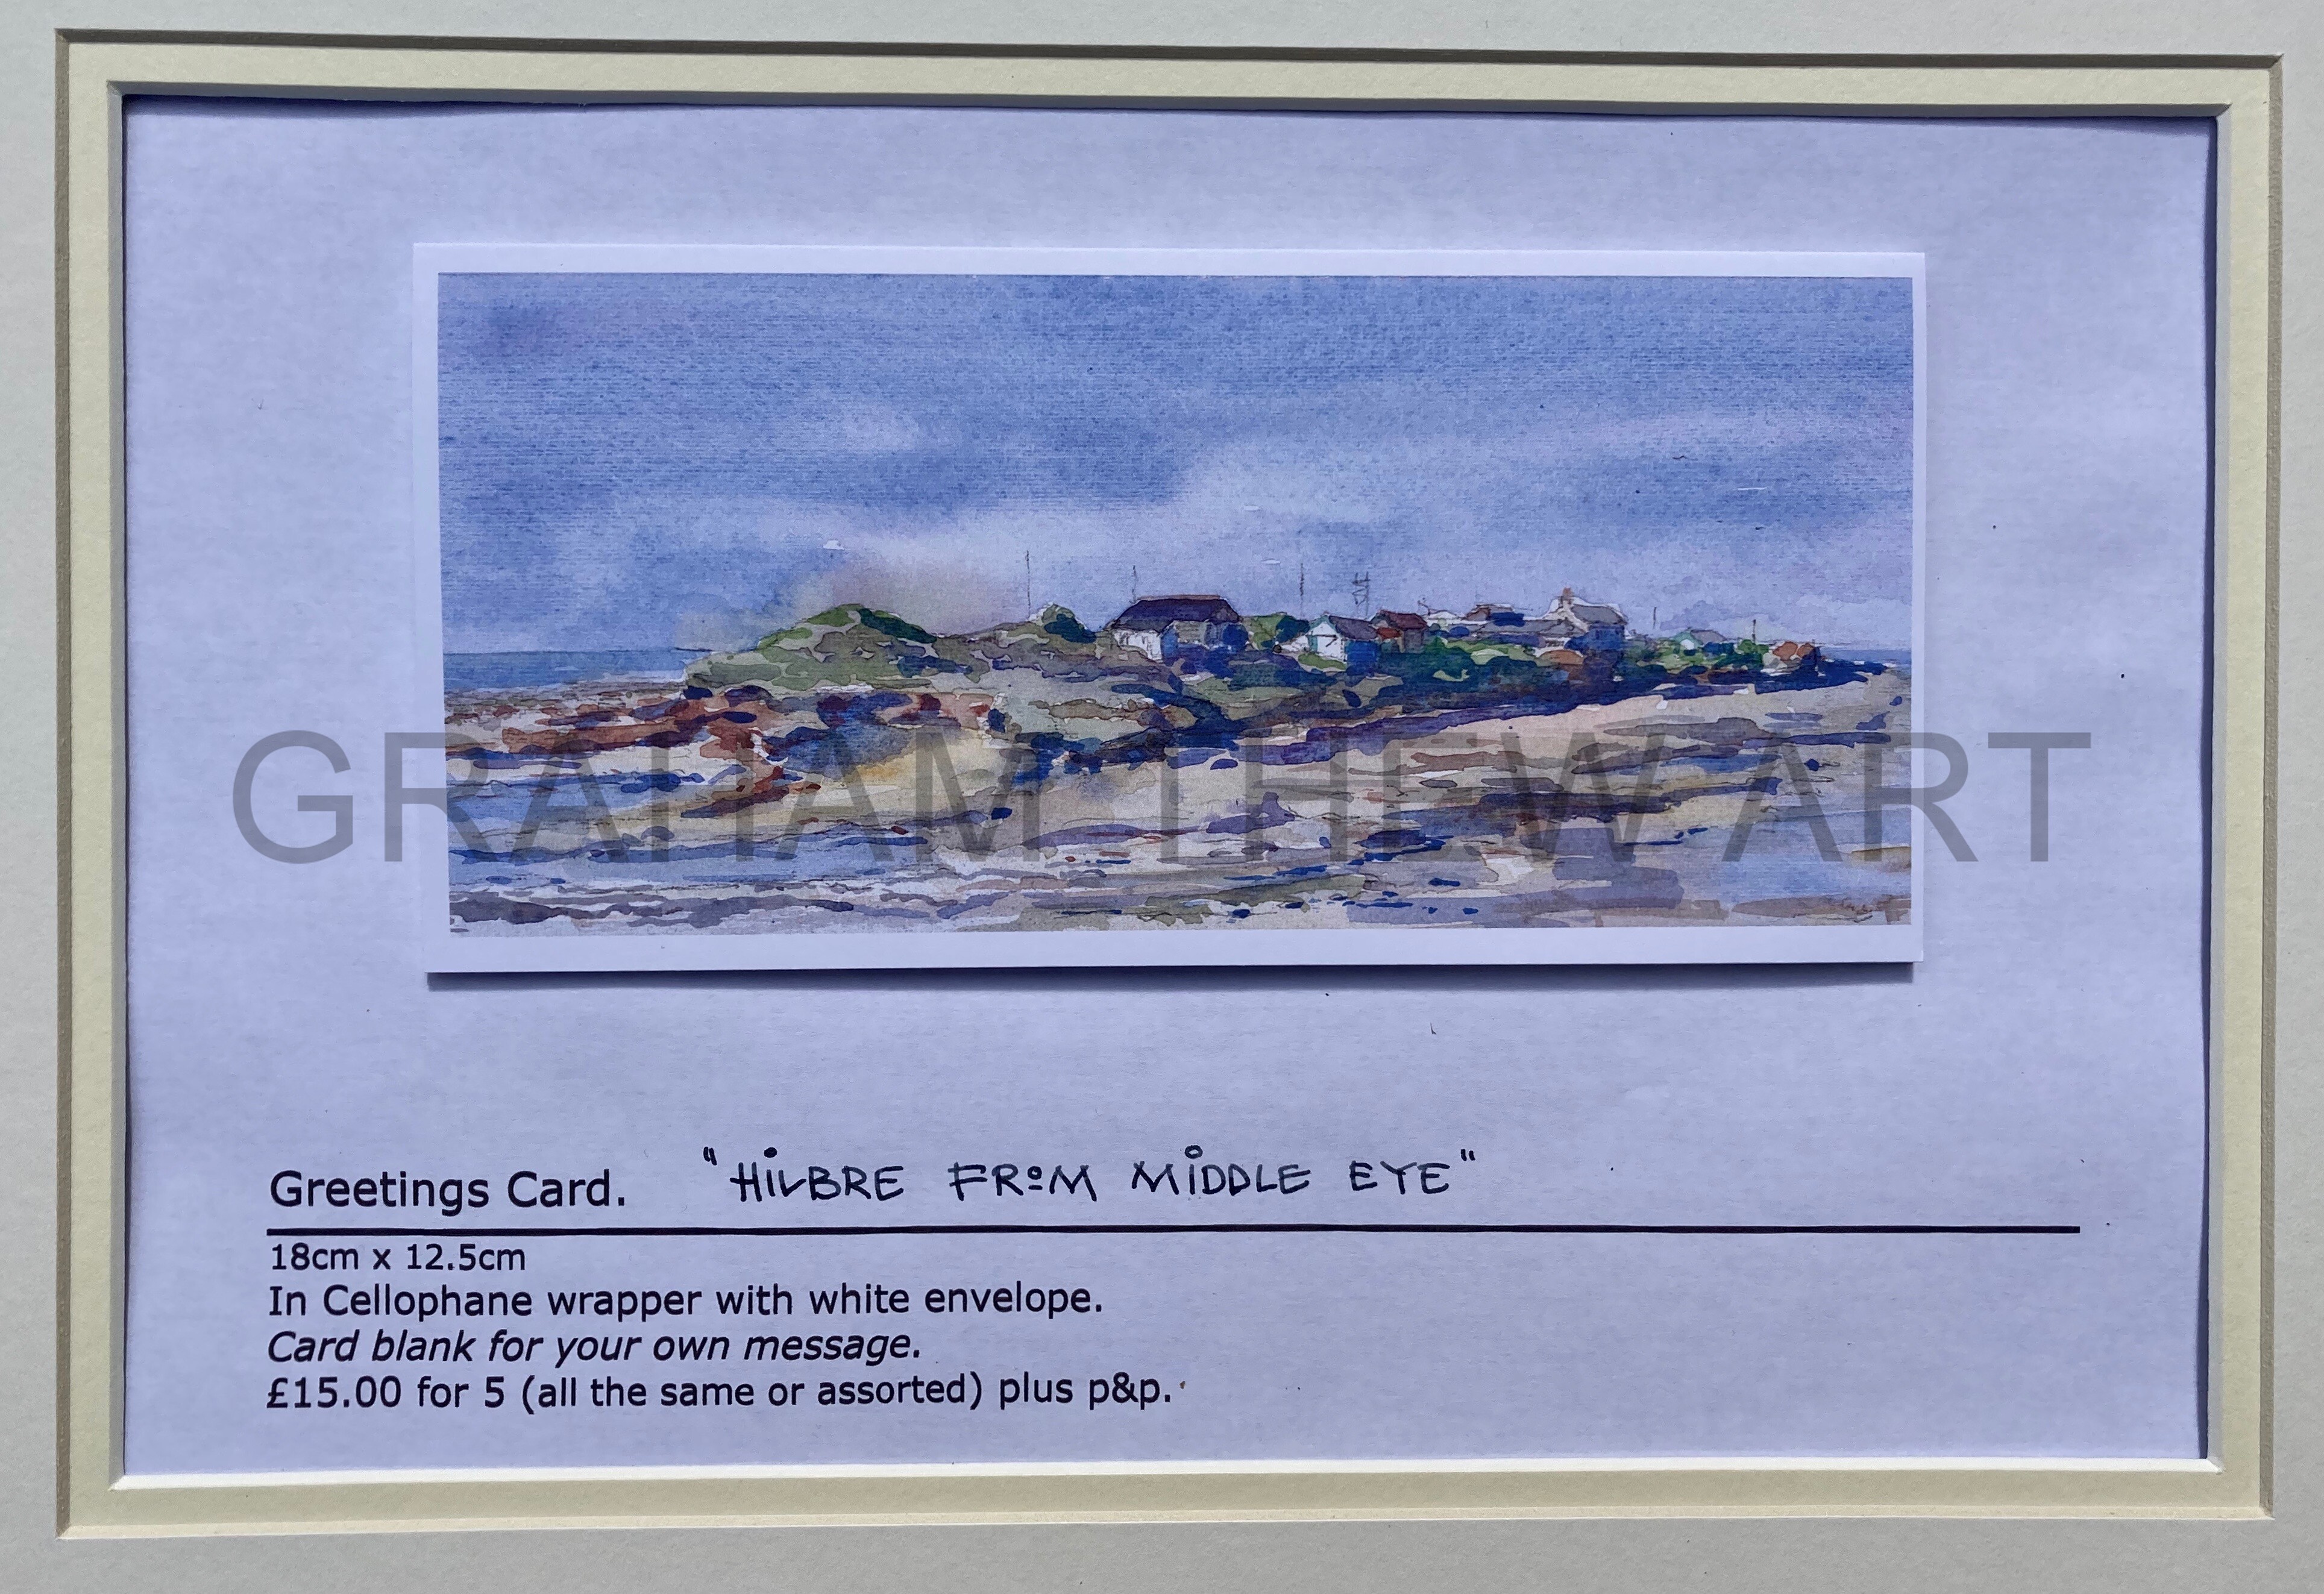 Greetings cards : Hilbre from Middle eye